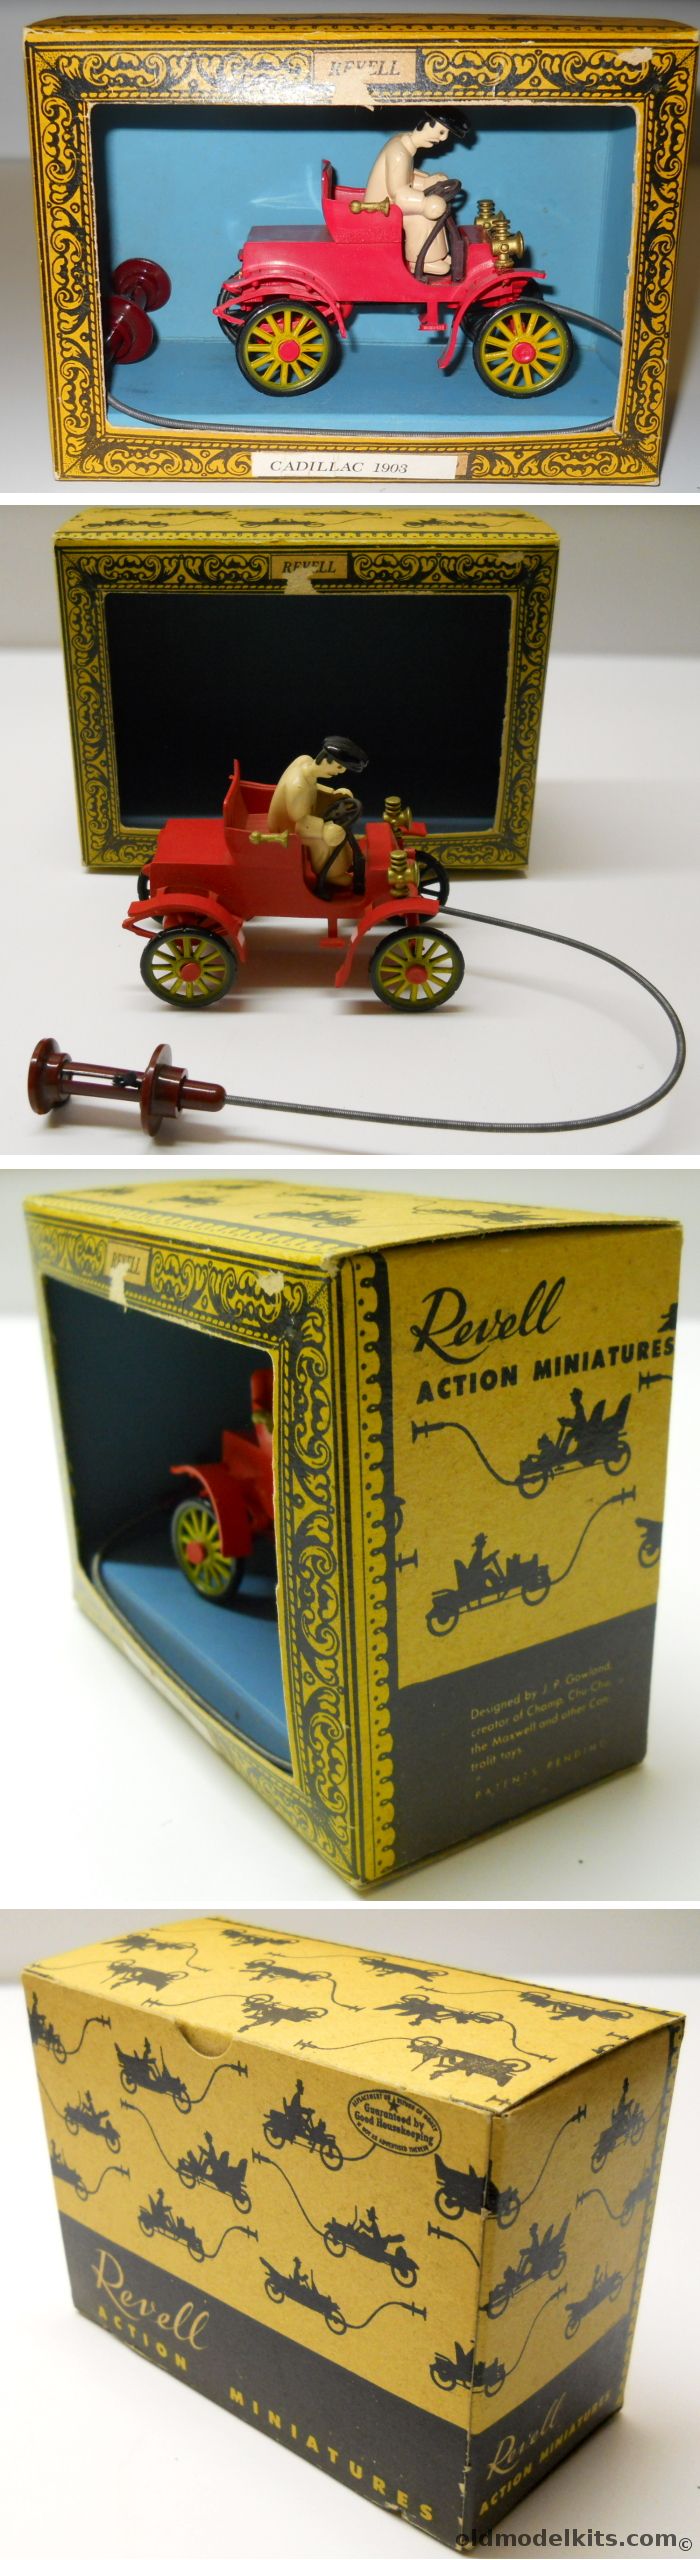 Revell 1/32 1903 Cadillac Action Miniatures -  Pre Highway Pioneers plastic model kit